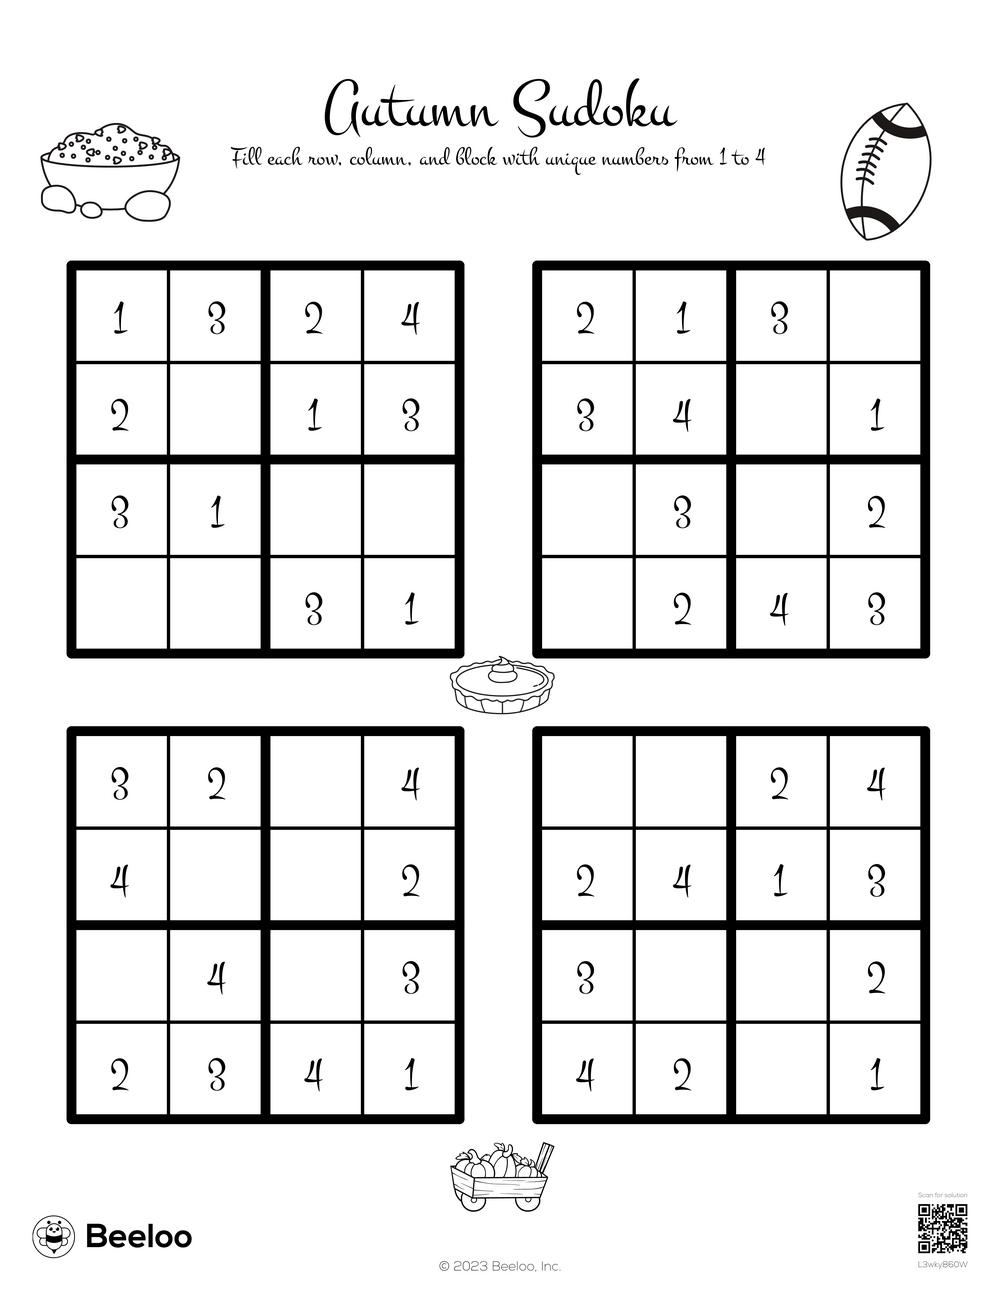 Autumn sudoku â printable crafts and activities for kids